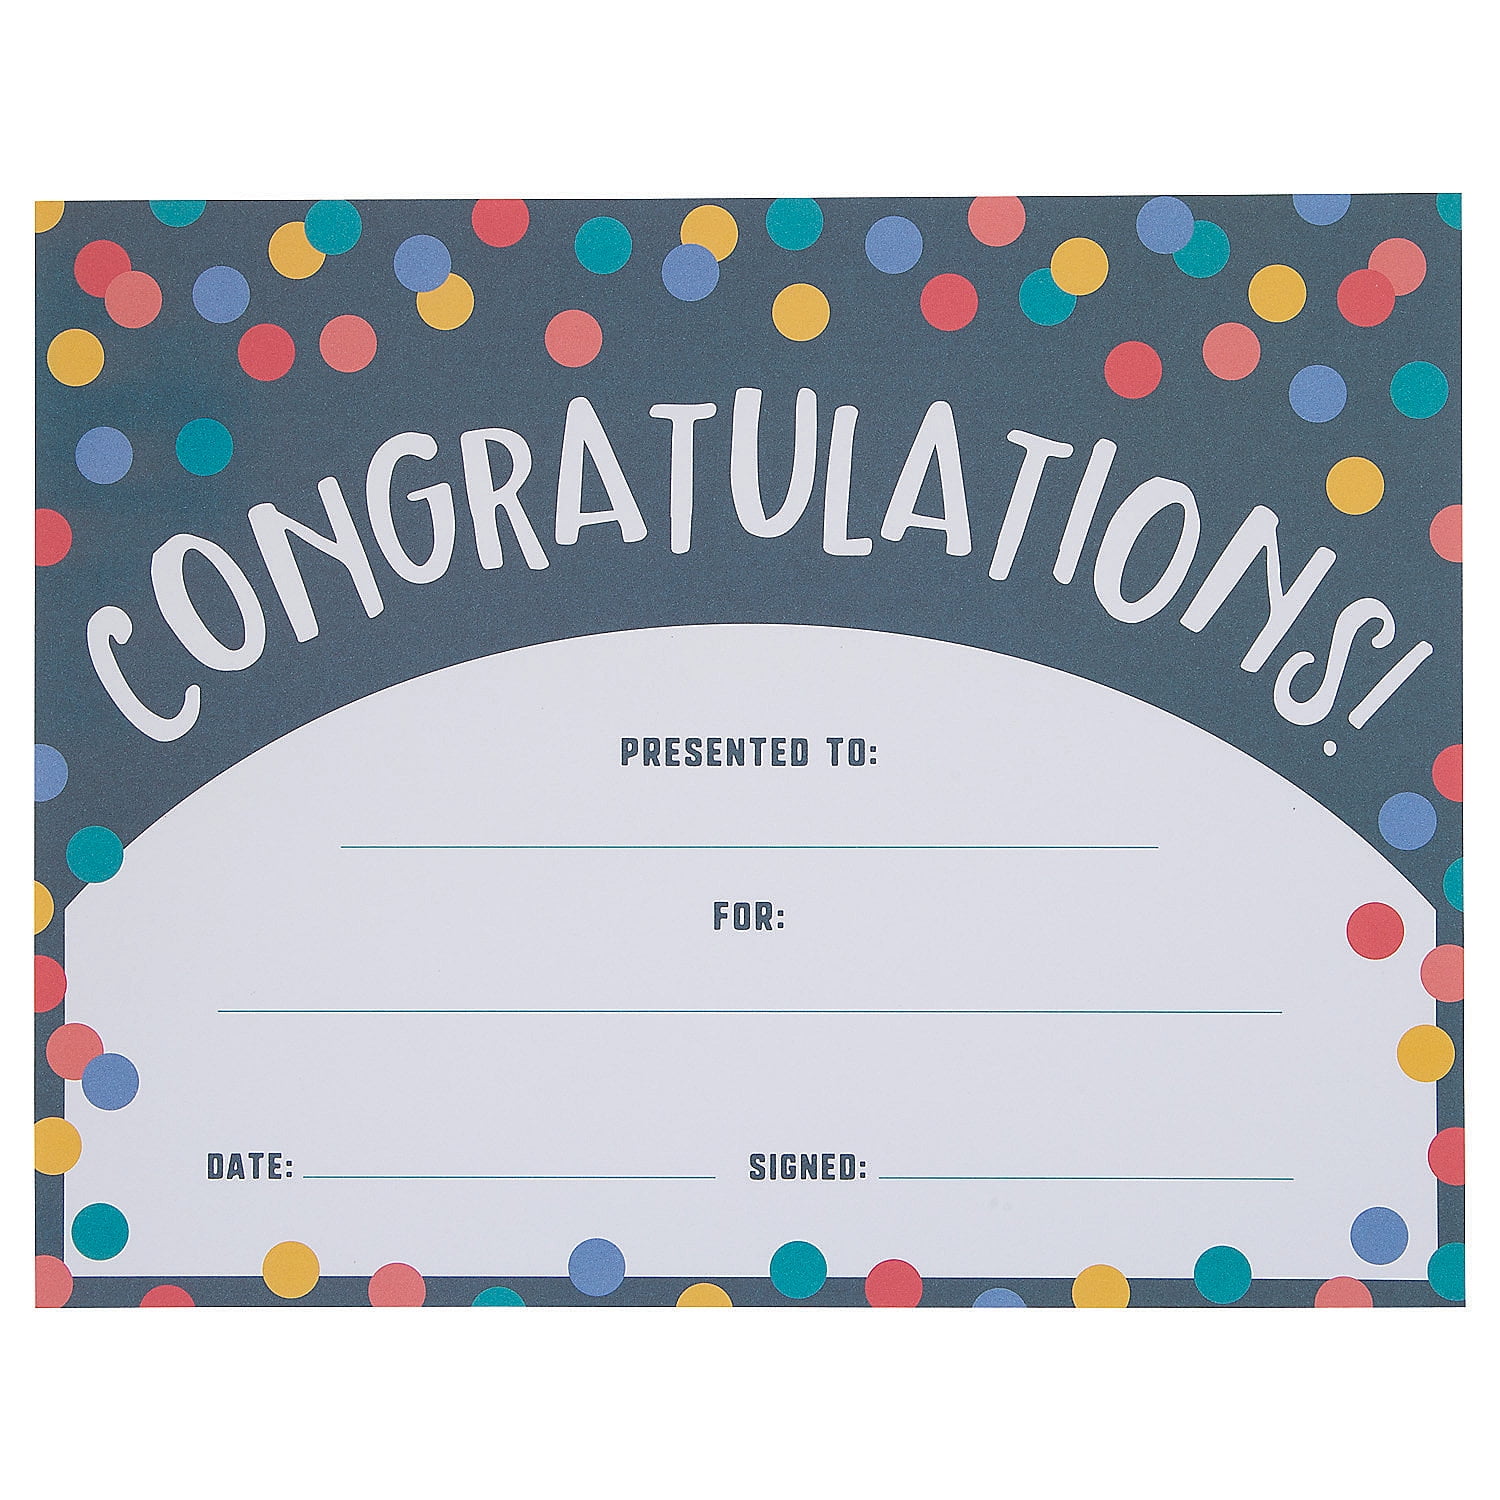 Congratulations Award Certificate Stationery 25 Pieces